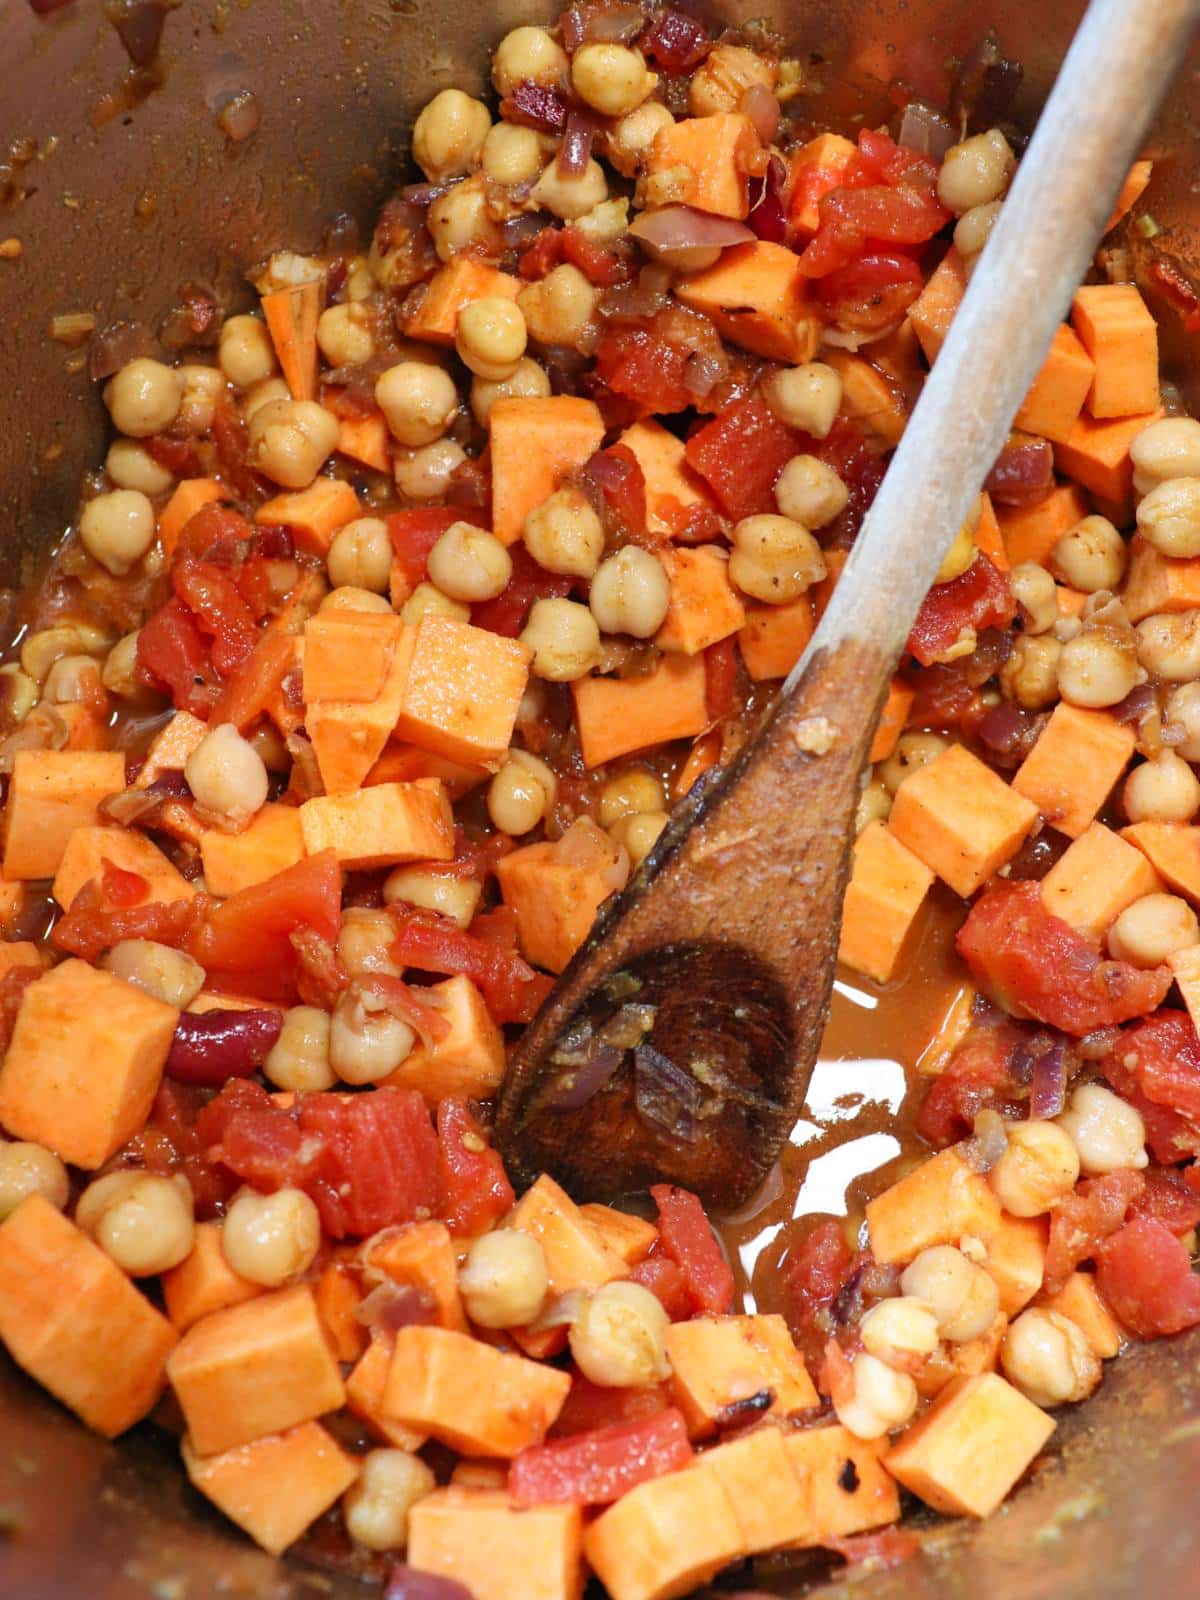 Chickpeas, sweet potatoes, tomatoes, spices, onion, garlic, ginger in an instant pot with a wooden spoon.